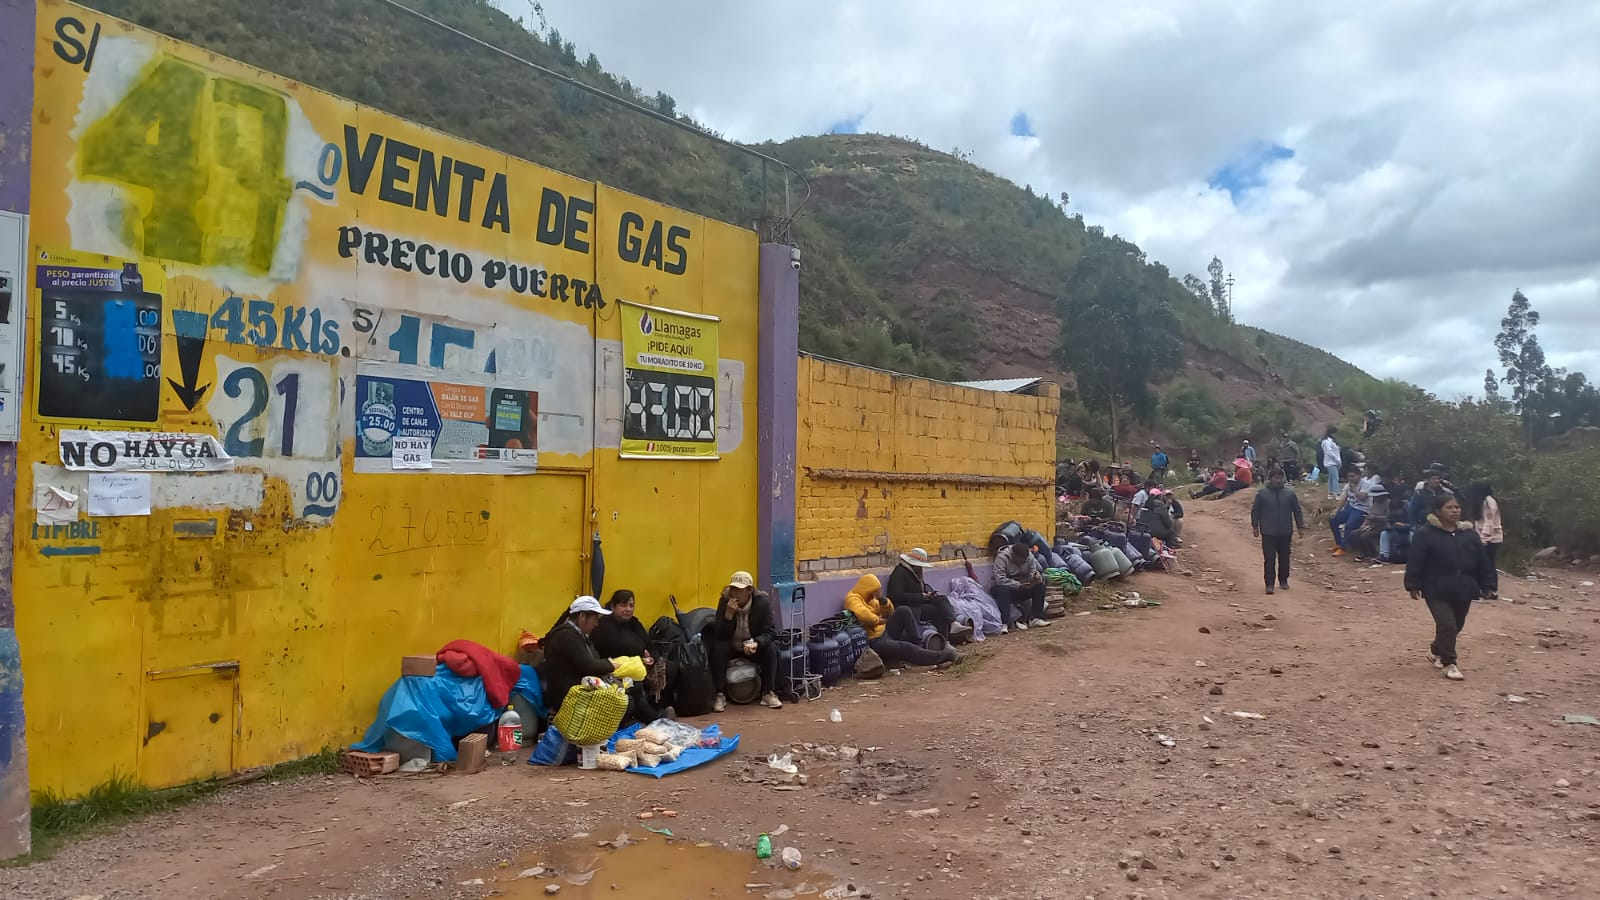 No domestic gas!  Citizens got up early to get bottled LPG in Cusco